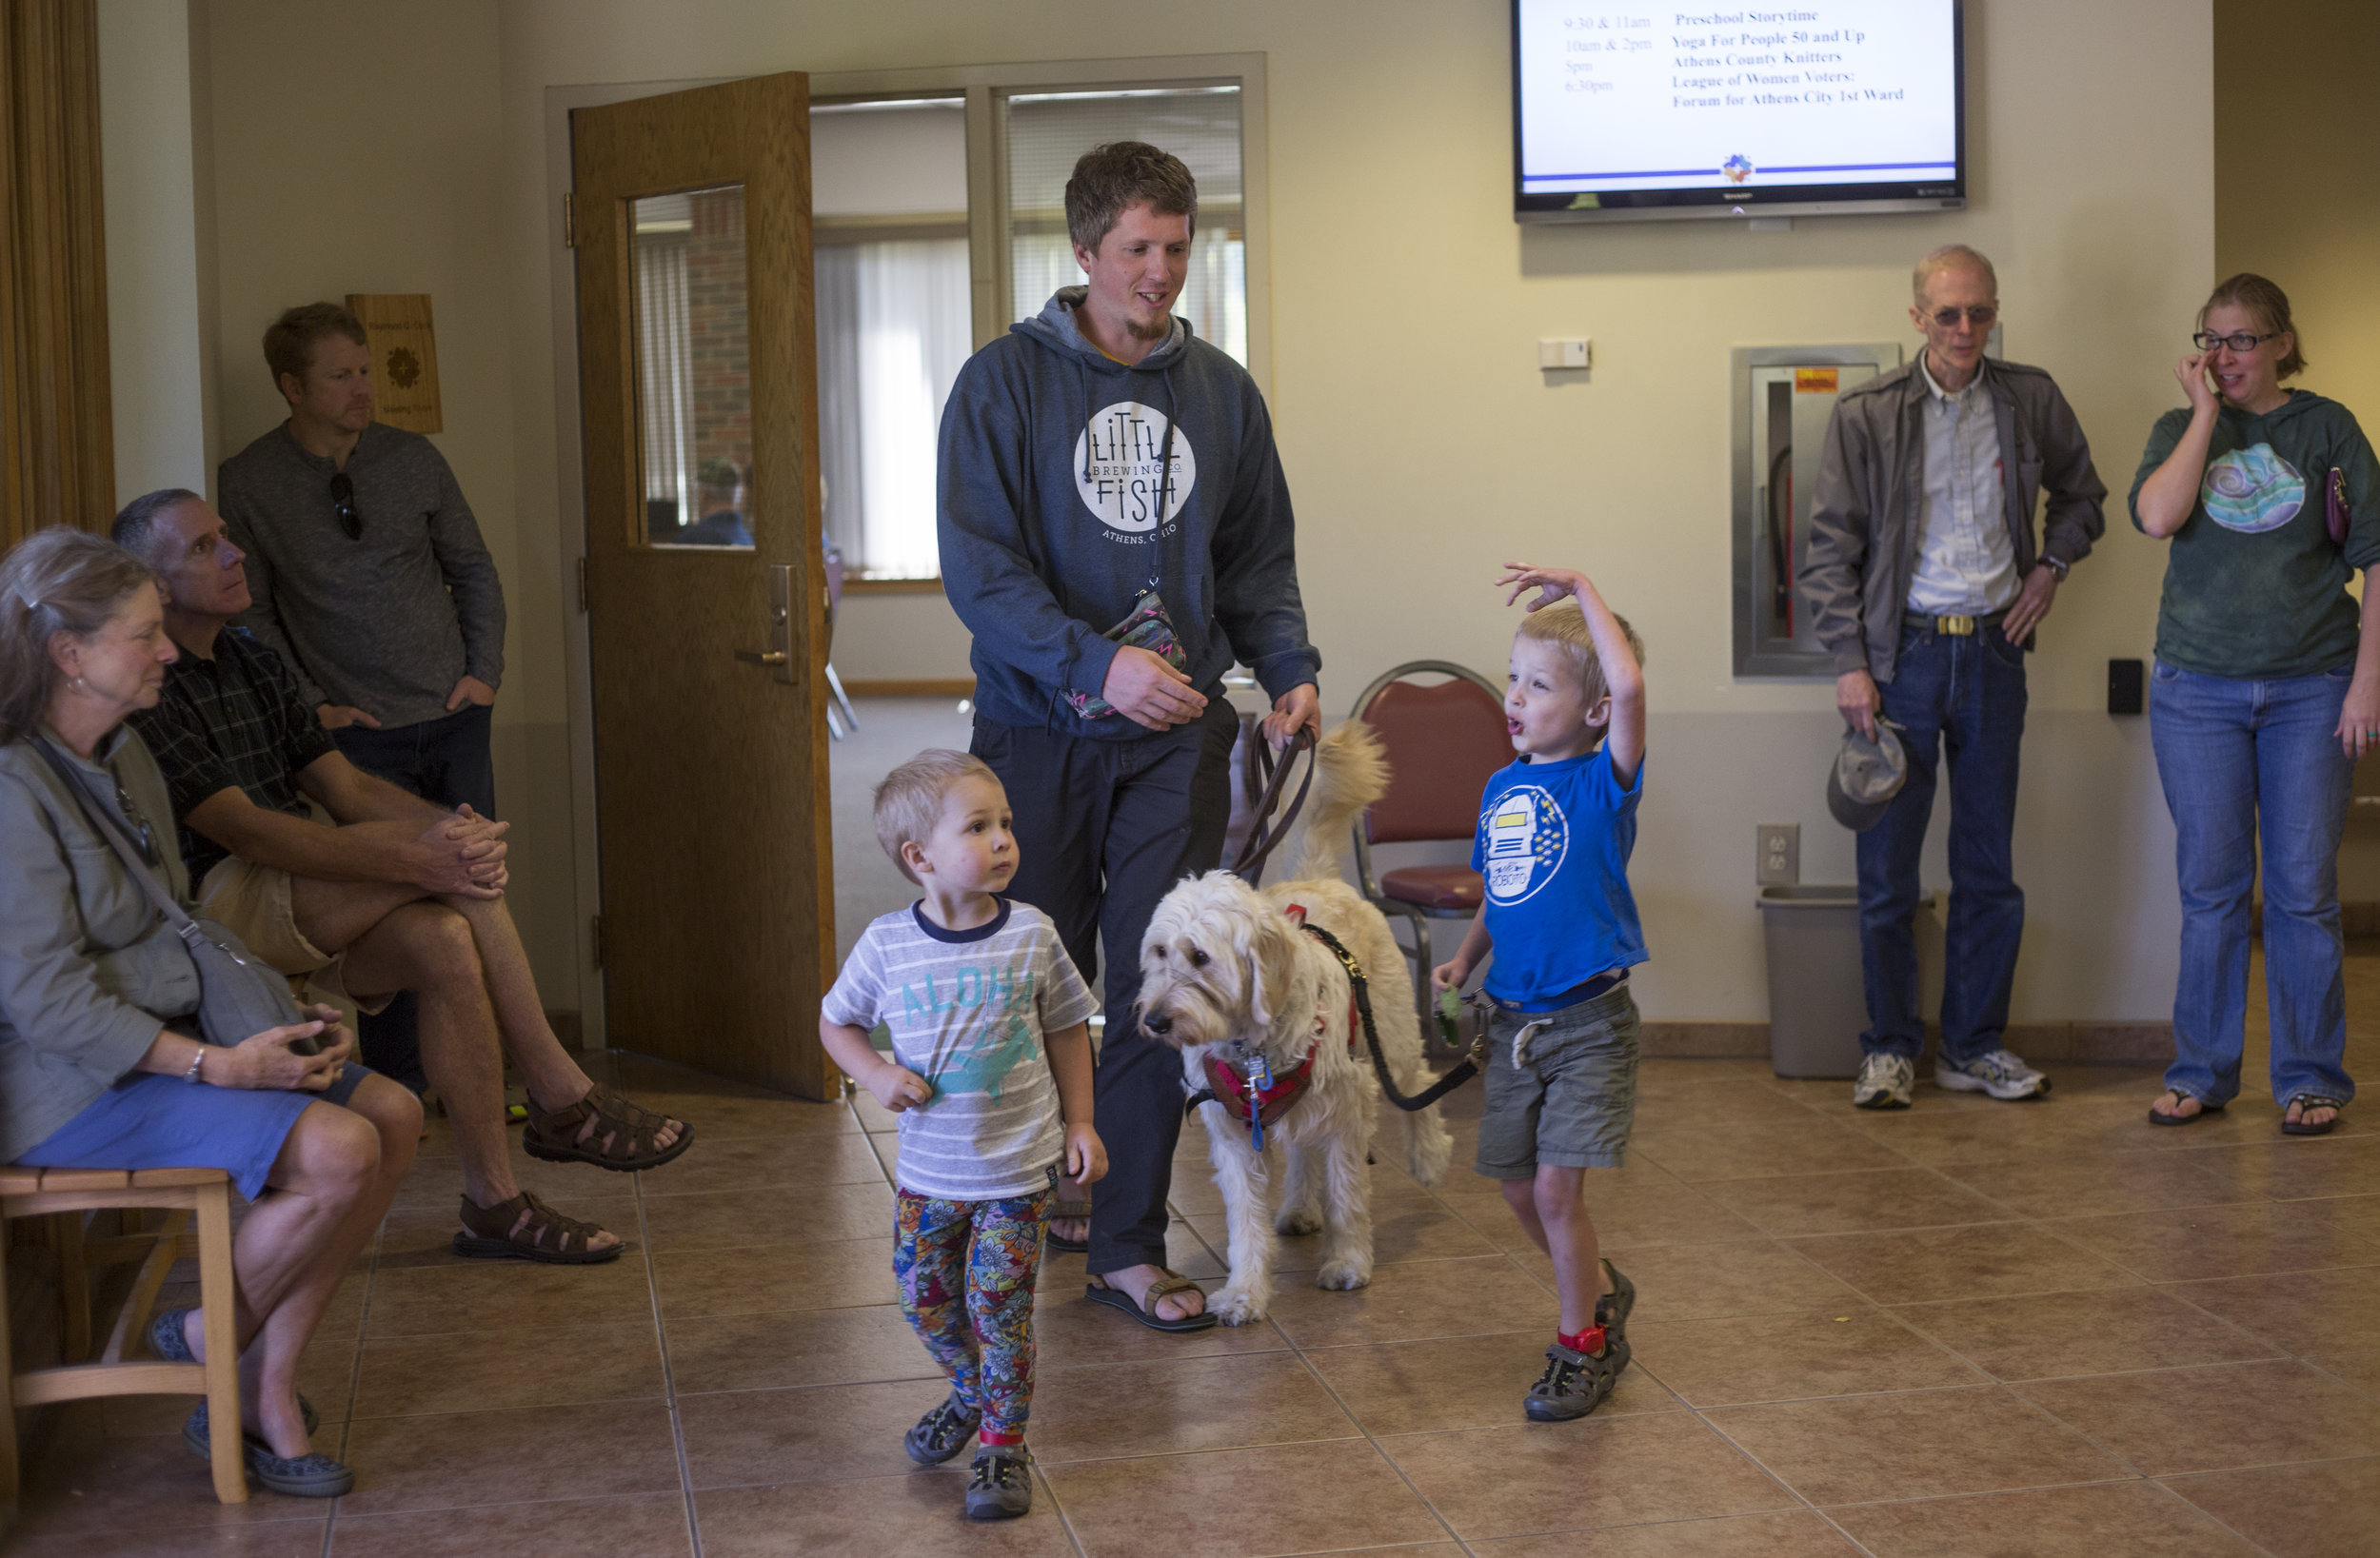  Josiah walks through the lobby of the Athens Public Library with Spad, his dad Jason, and his brother Judah while his mom Rachel, his grandfather Bruce Metzger, and others stand on the perimeter of the lobby. The library is now one of Josiah's favor